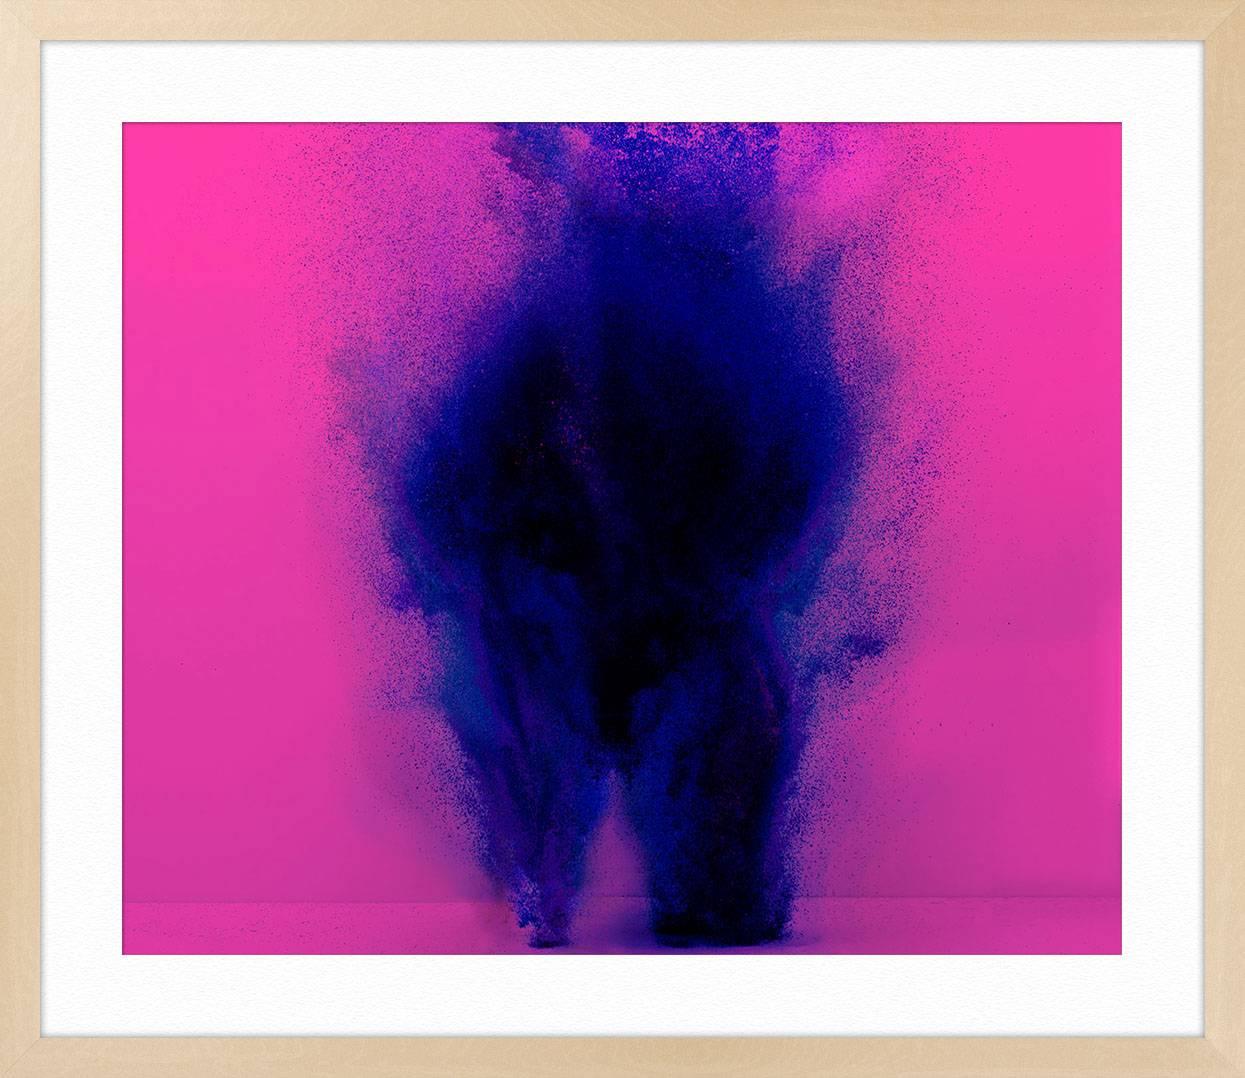 ABOUT THIS PIECE: This image belongs to the Lola-inspired Movement series that won 1st place in the 2009 American Photographic Artists awards.

The idea was to shoot fragrances without actually shooting them as they are packaged for sale. This led